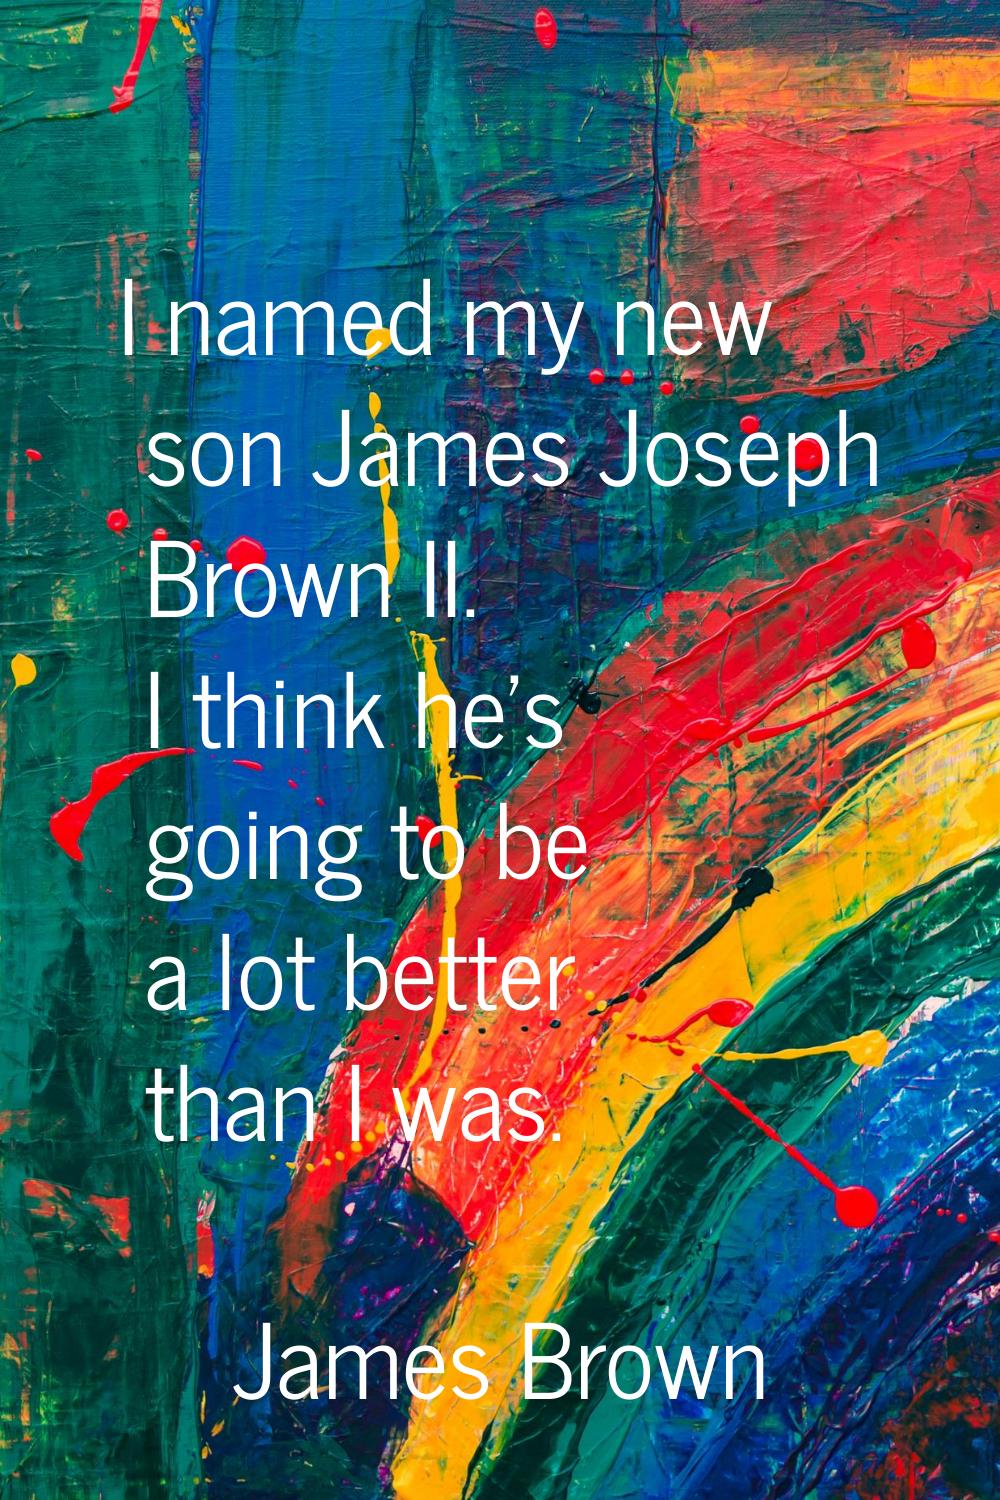 I named my new son James Joseph Brown II. I think he's going to be a lot better than I was.